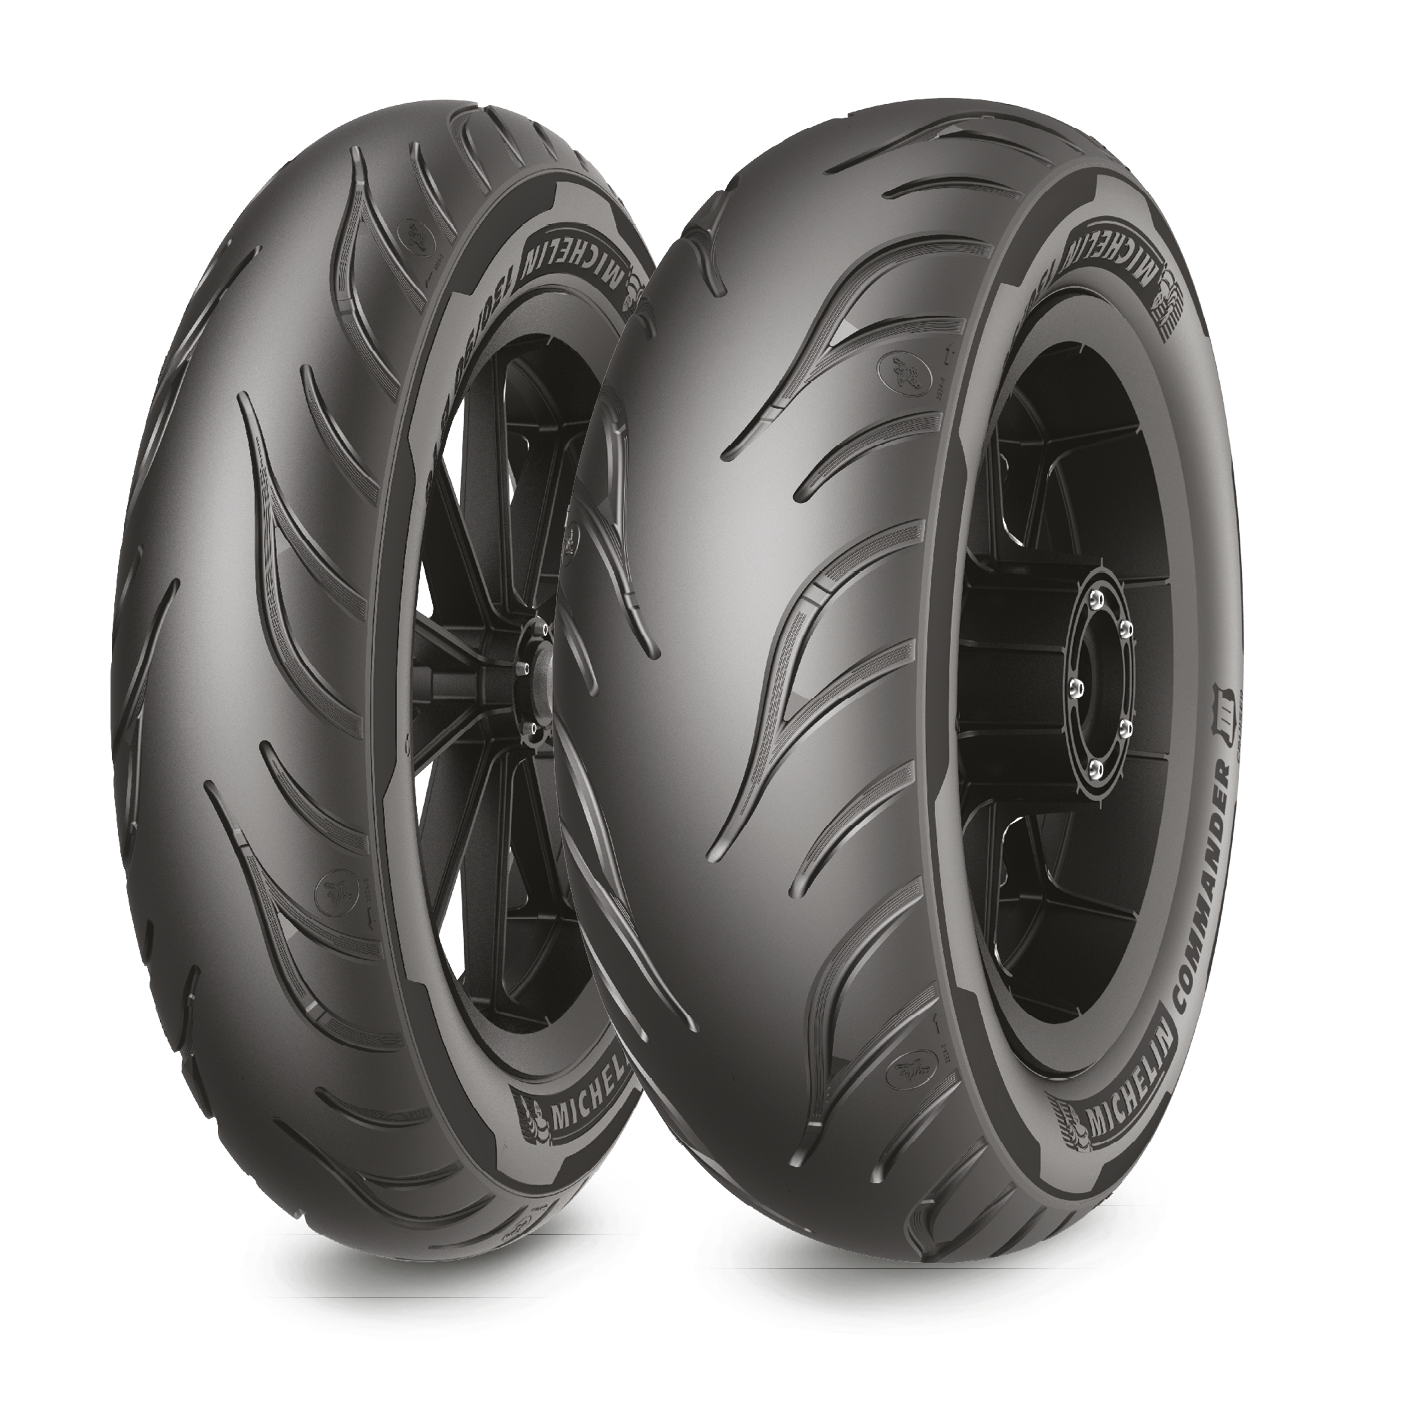 Michelin Commander III - Tire reviews and ratings